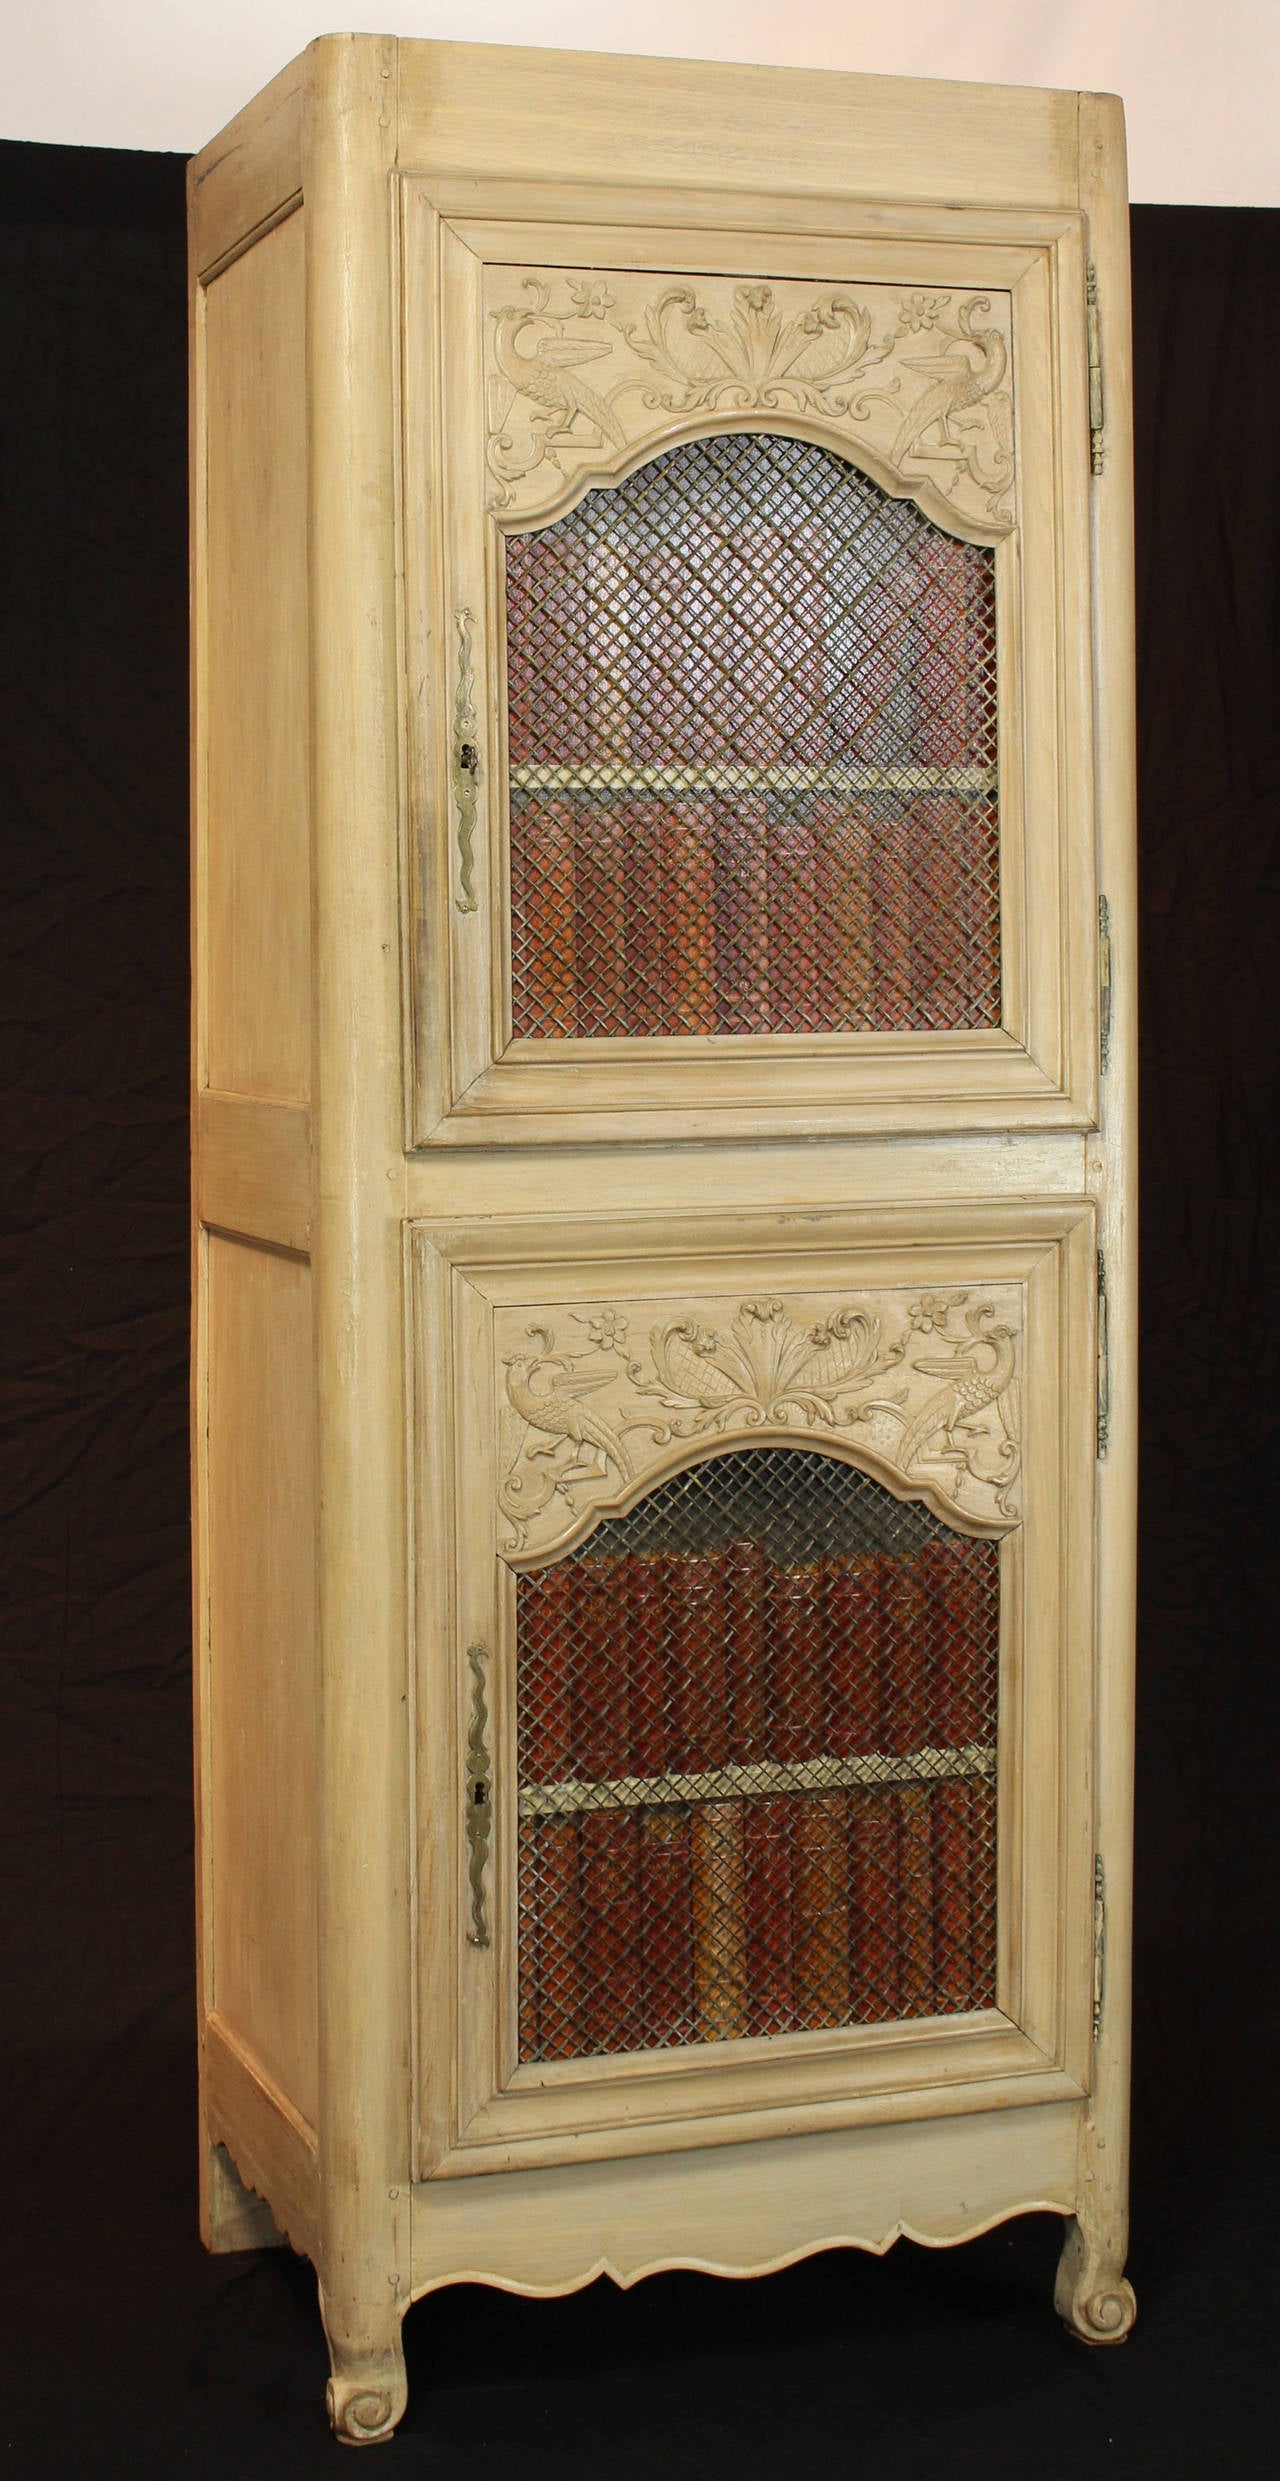 A 19th century French cabinet with two carved and faux painted doors accented with brass grillwork. The cabinet has beed converted to accommodate a television and associated equipment.